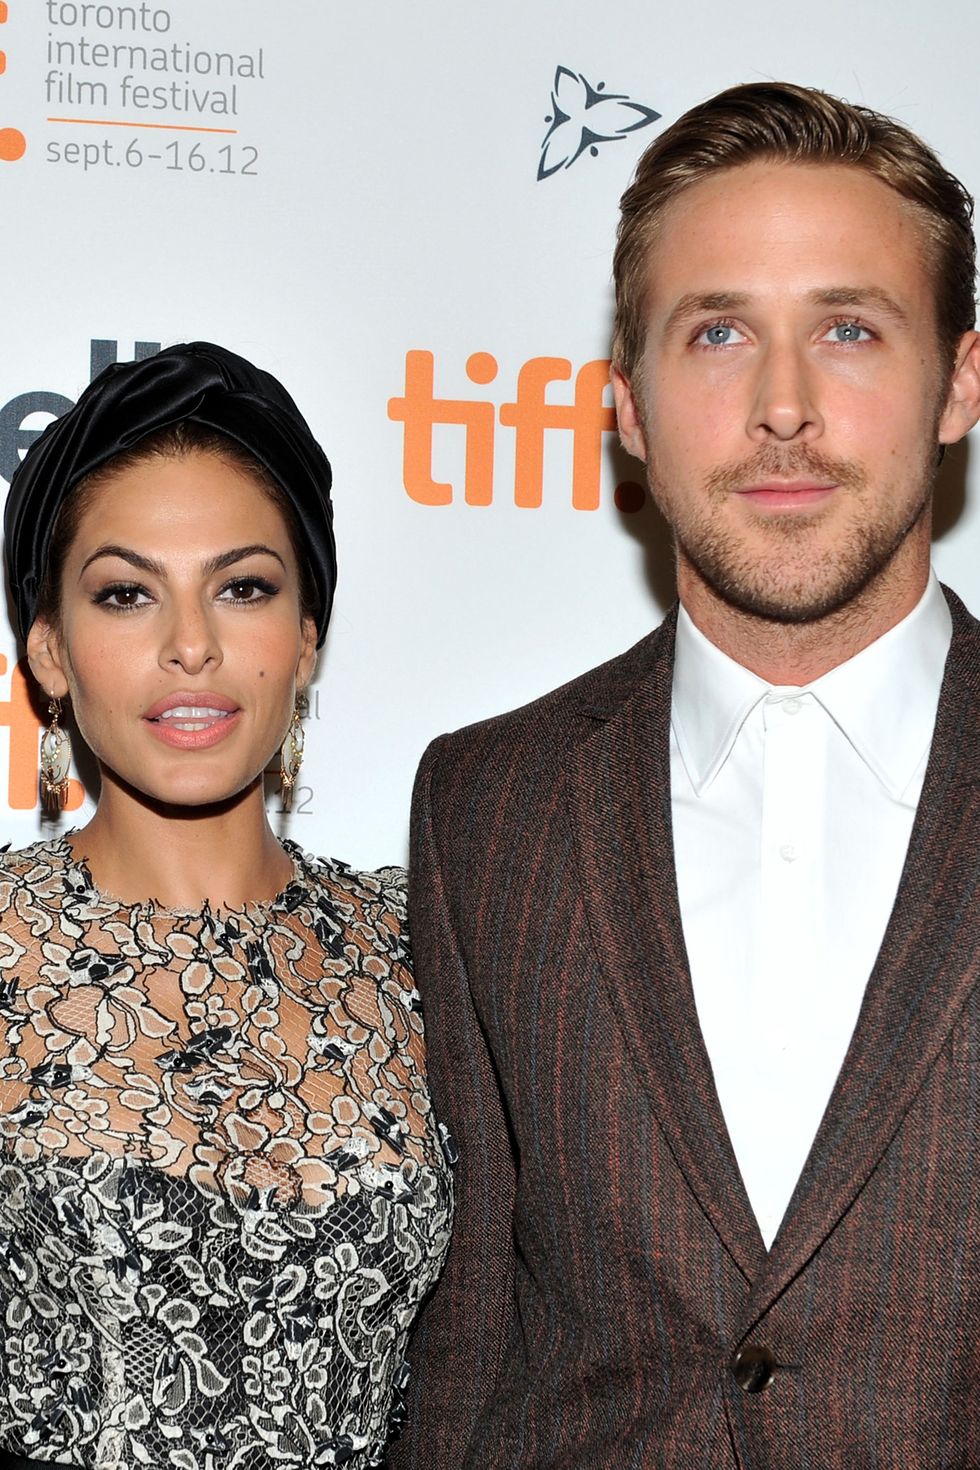 <p>The internet's boyfriend Ryan Gosling shares two daughters with his&nbsp;<em data-redactor-tag="em" data-verified="redactor">The Place Beyond the Pines</em><span class="redactor-invisible-space" data-verified="redactor" data-redactor-tag="span" data-redactor-class="redactor-invisible-space"> co-star, who he began dating in 2011. Years back, Mendes explained <a href="http://www.usmagazine.com/celebrity-news/news/eva-mendes-marriage-is-very-unsexy-2011275" target="_blank" data-tracking-id="recirc-text-link">during a <em data-redactor-tag="em" data-verified="redactor">Chelsea Lately</em> appearance</a><span class="redactor-invisible-space" data-verified="redactor" data-redactor-tag="span" data-redactor-class="redactor-invisible-space">&nbsp;that</span>&nbsp;she "think[s] it's really sexy to be with someone in your 50s and 60s and be like, 'That's my boyfriend.'"</span></p><p><span class="redactor-invisible-space" data-verified="redactor" data-redactor-tag="span" data-redactor-class="redactor-invisible-space"><strong data-redactor-tag="strong" data-verified="redactor">RELATED:&nbsp;</strong></span><a href="http://www.redbookmag.com/love-sex/relationships/features/g2623/celeb-power-couple-watch/"></a><strong data-redactor-tag="strong" data-verified="redactor"><a href="19 Celebrity Couples On How They First Met" target="_blank" data-tracking-id="recirc-text-link">http://www.redbookmag.com/love-sex/relationships/g4038/celebrity-couples-on-how-they-first-met/</a></strong></p>